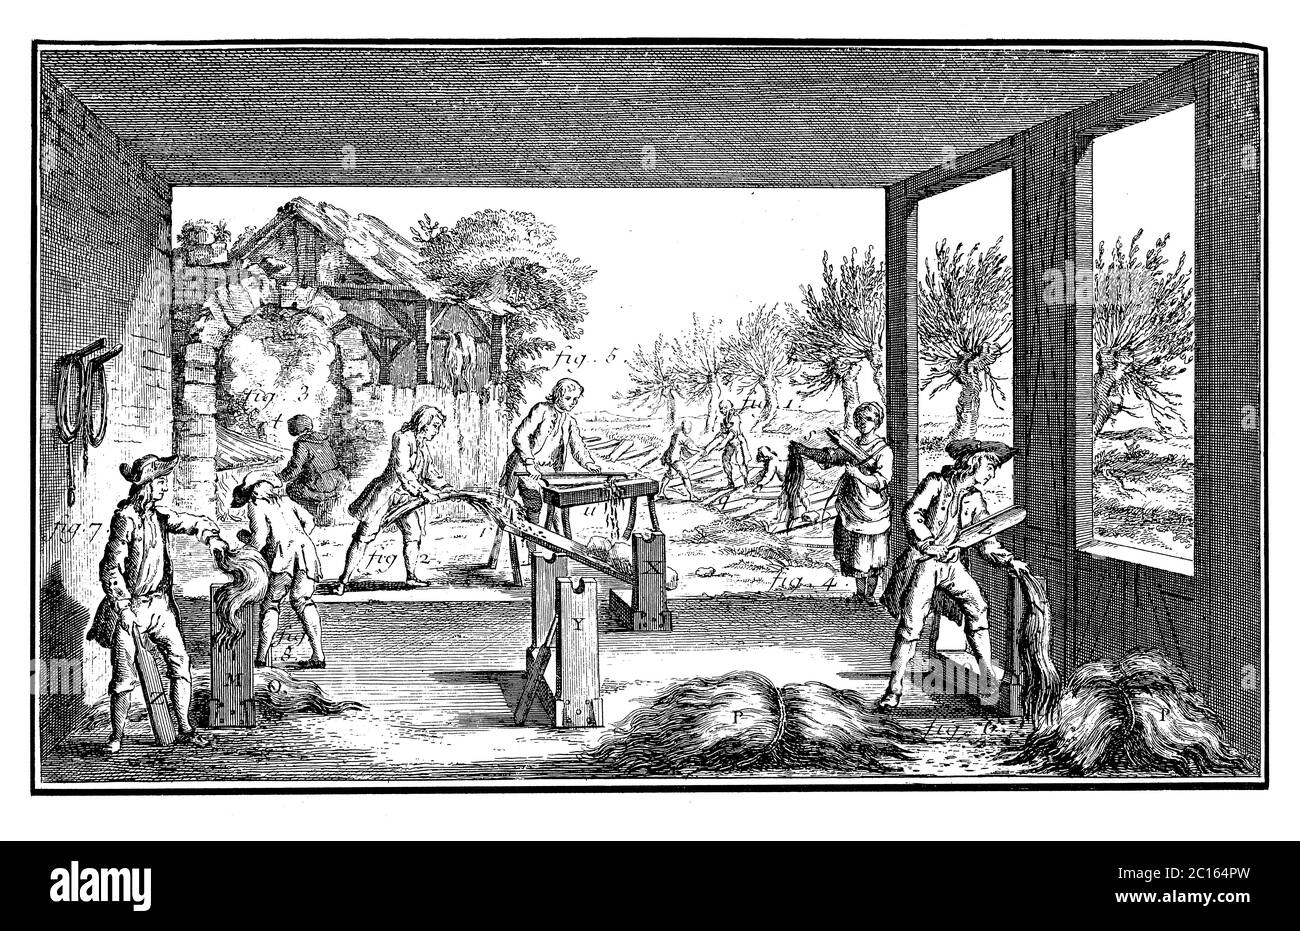 18th century illustration of industrial hemp or cannabis processing. Published in 'A Diderot Pictorial Encyclopedia of Trades and Industry” Stock Photo